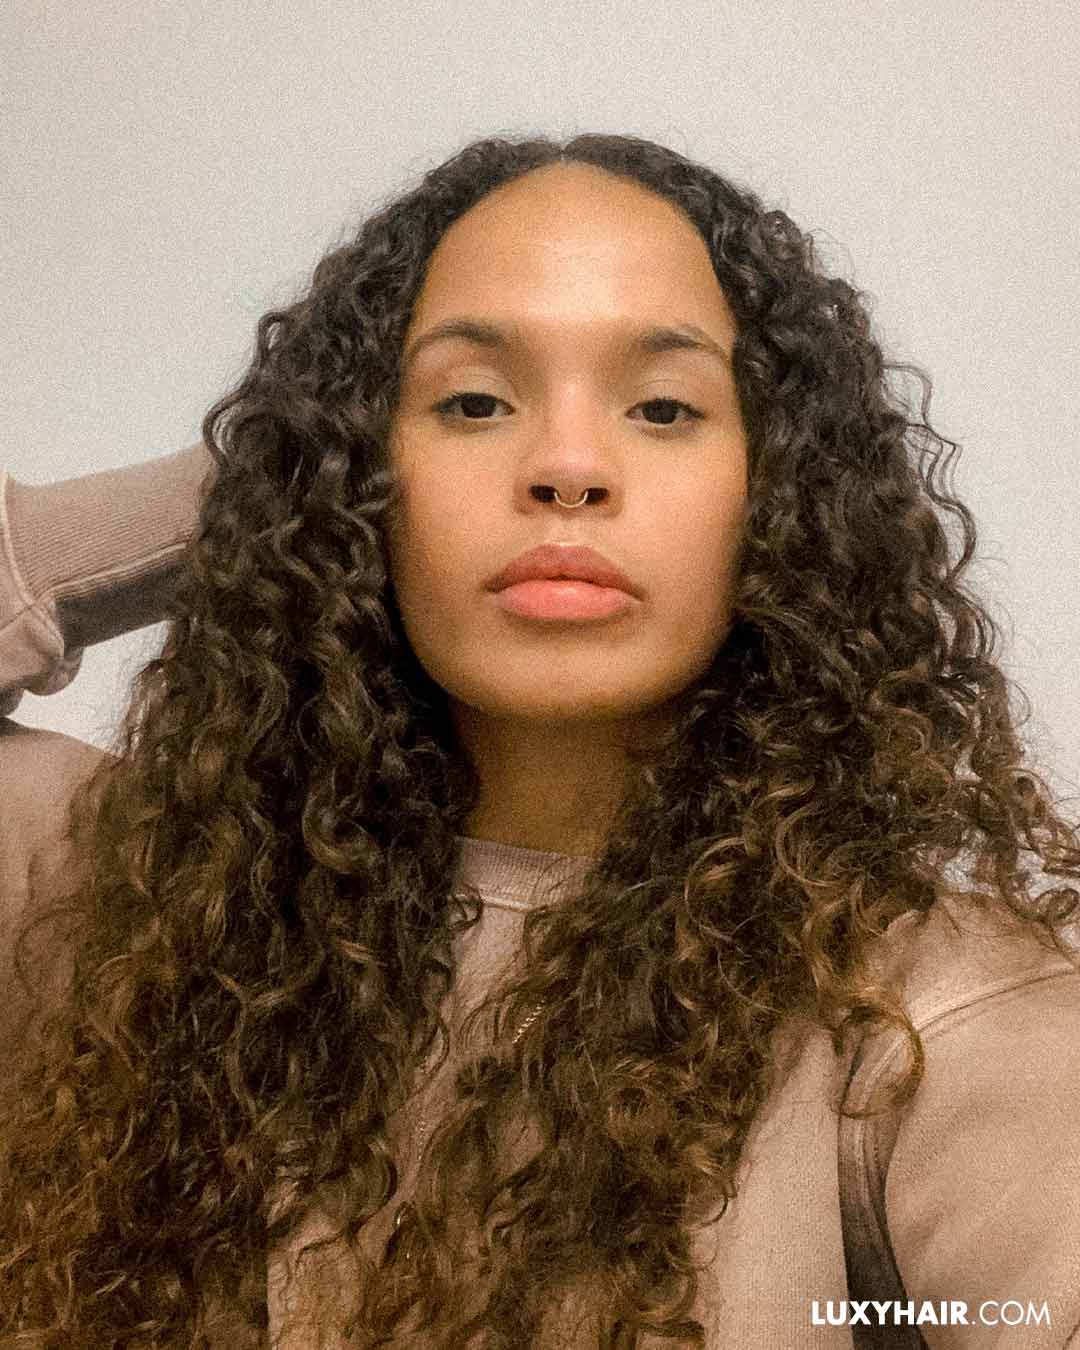 Have You Seen The Body Wave Perm Hairstyle Yet? If Not, You Have